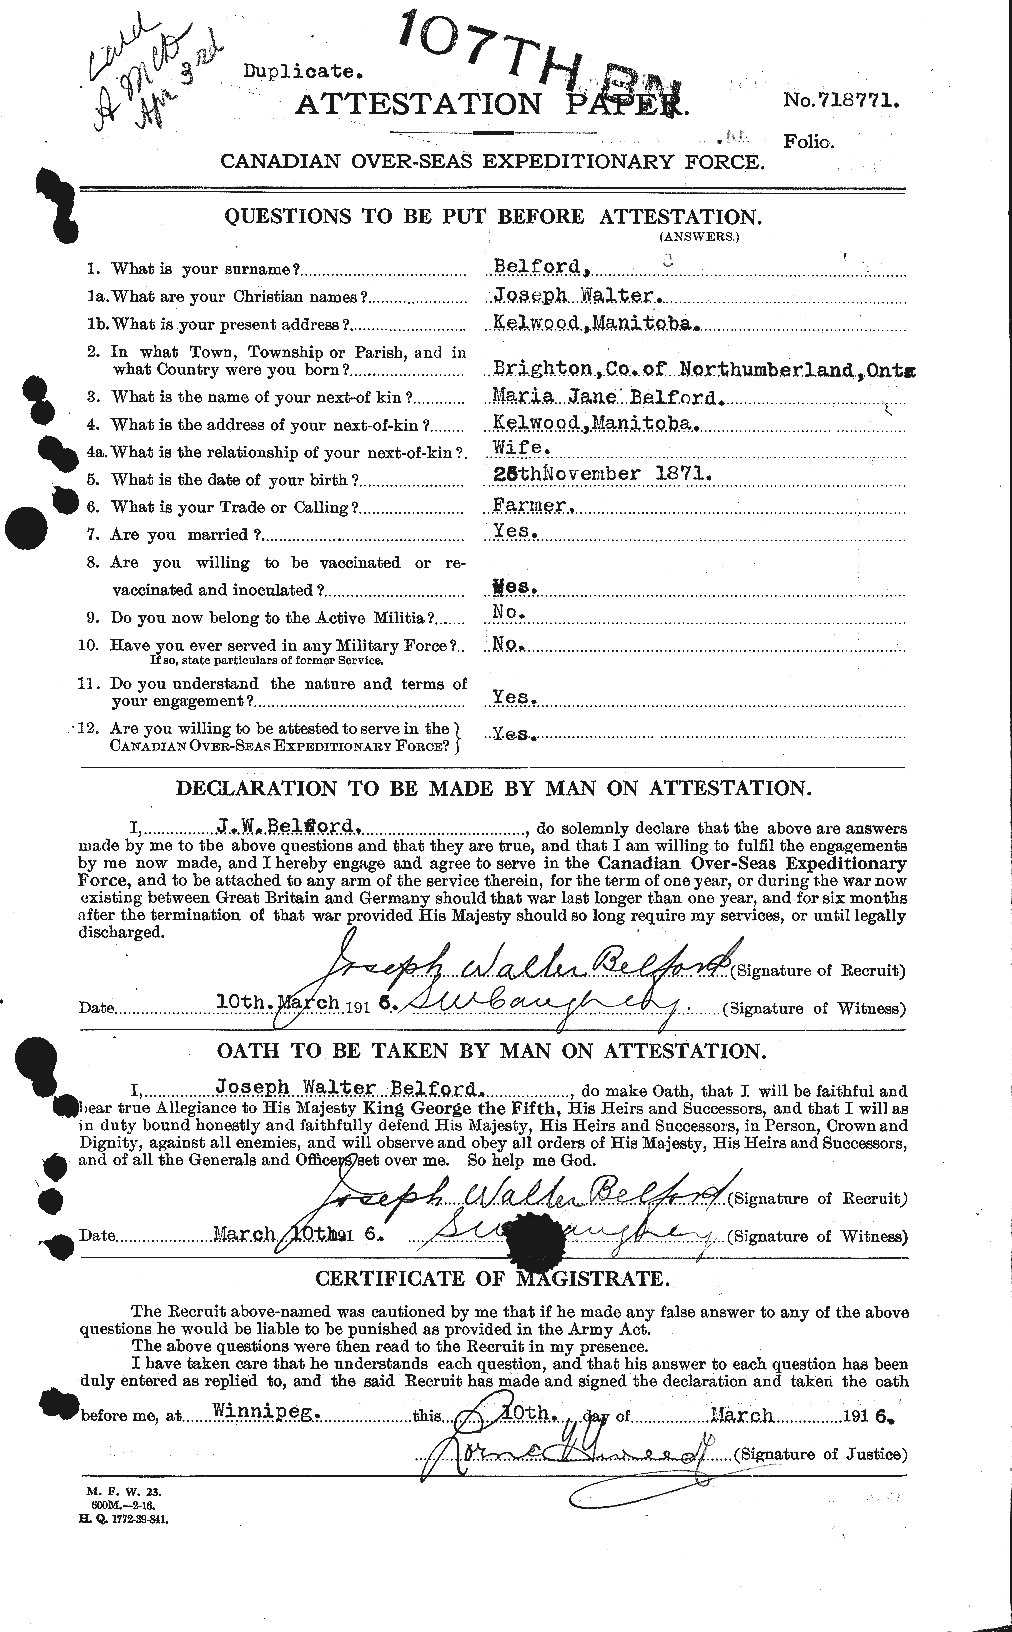 Personnel Records of the First World War - CEF 232463a